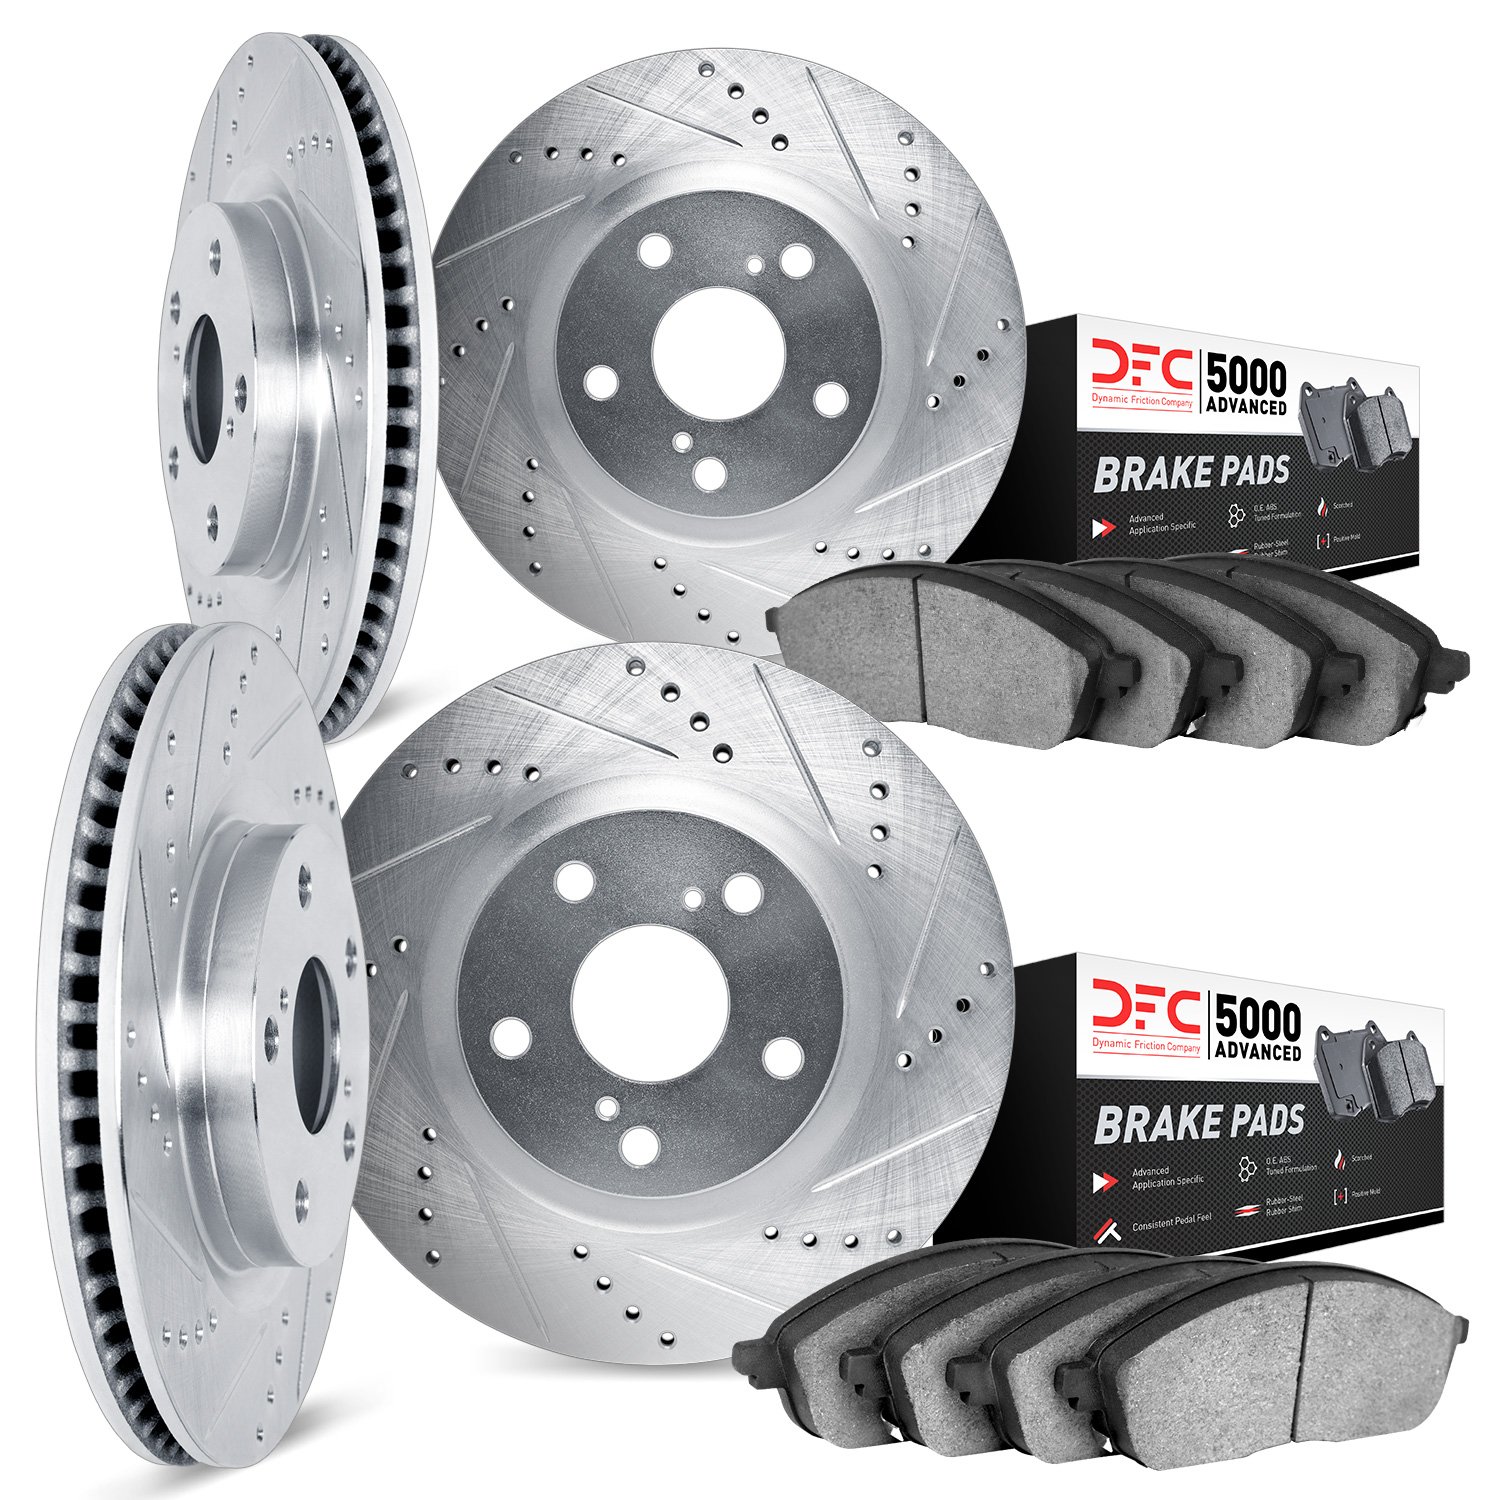 7504-31042 Drilled/Slotted Brake Rotors w/5000 Advanced Brake Pads Kit [Silver], 2015-2015 BMW, Position: Front and Rear